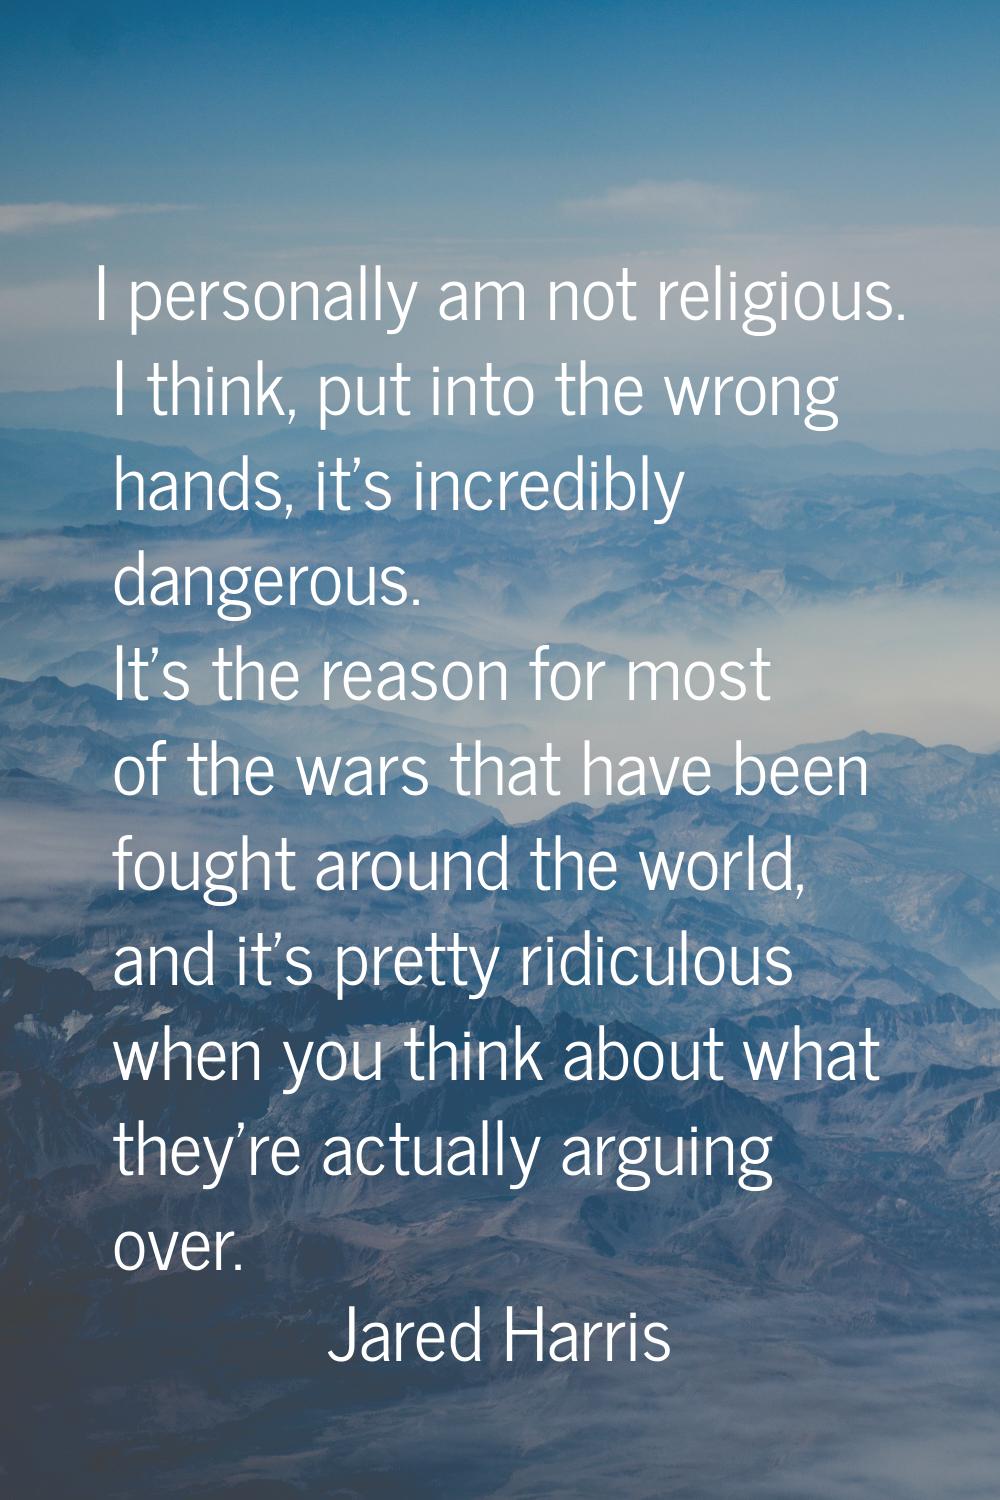 I personally am not religious. I think, put into the wrong hands, it's incredibly dangerous. It's t